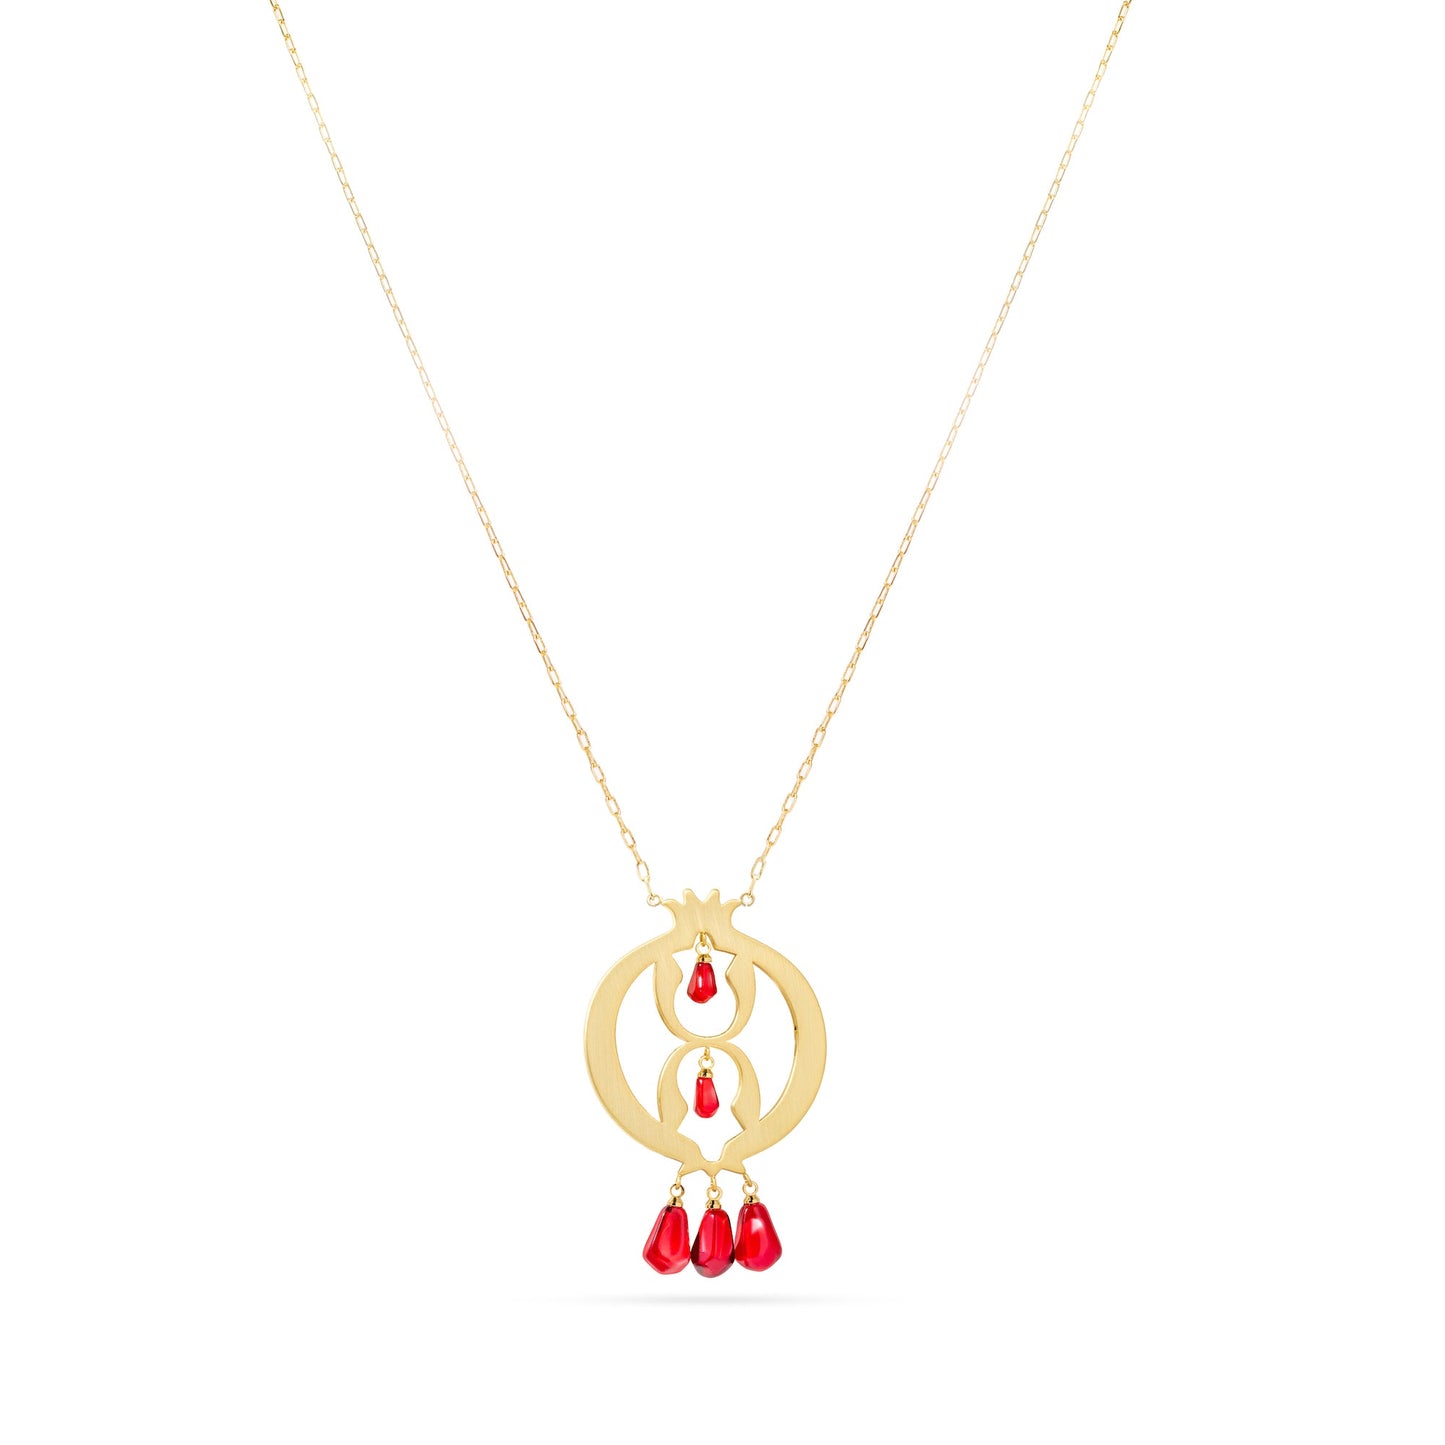 Pomegranate long Necklace - Lusanet Collective